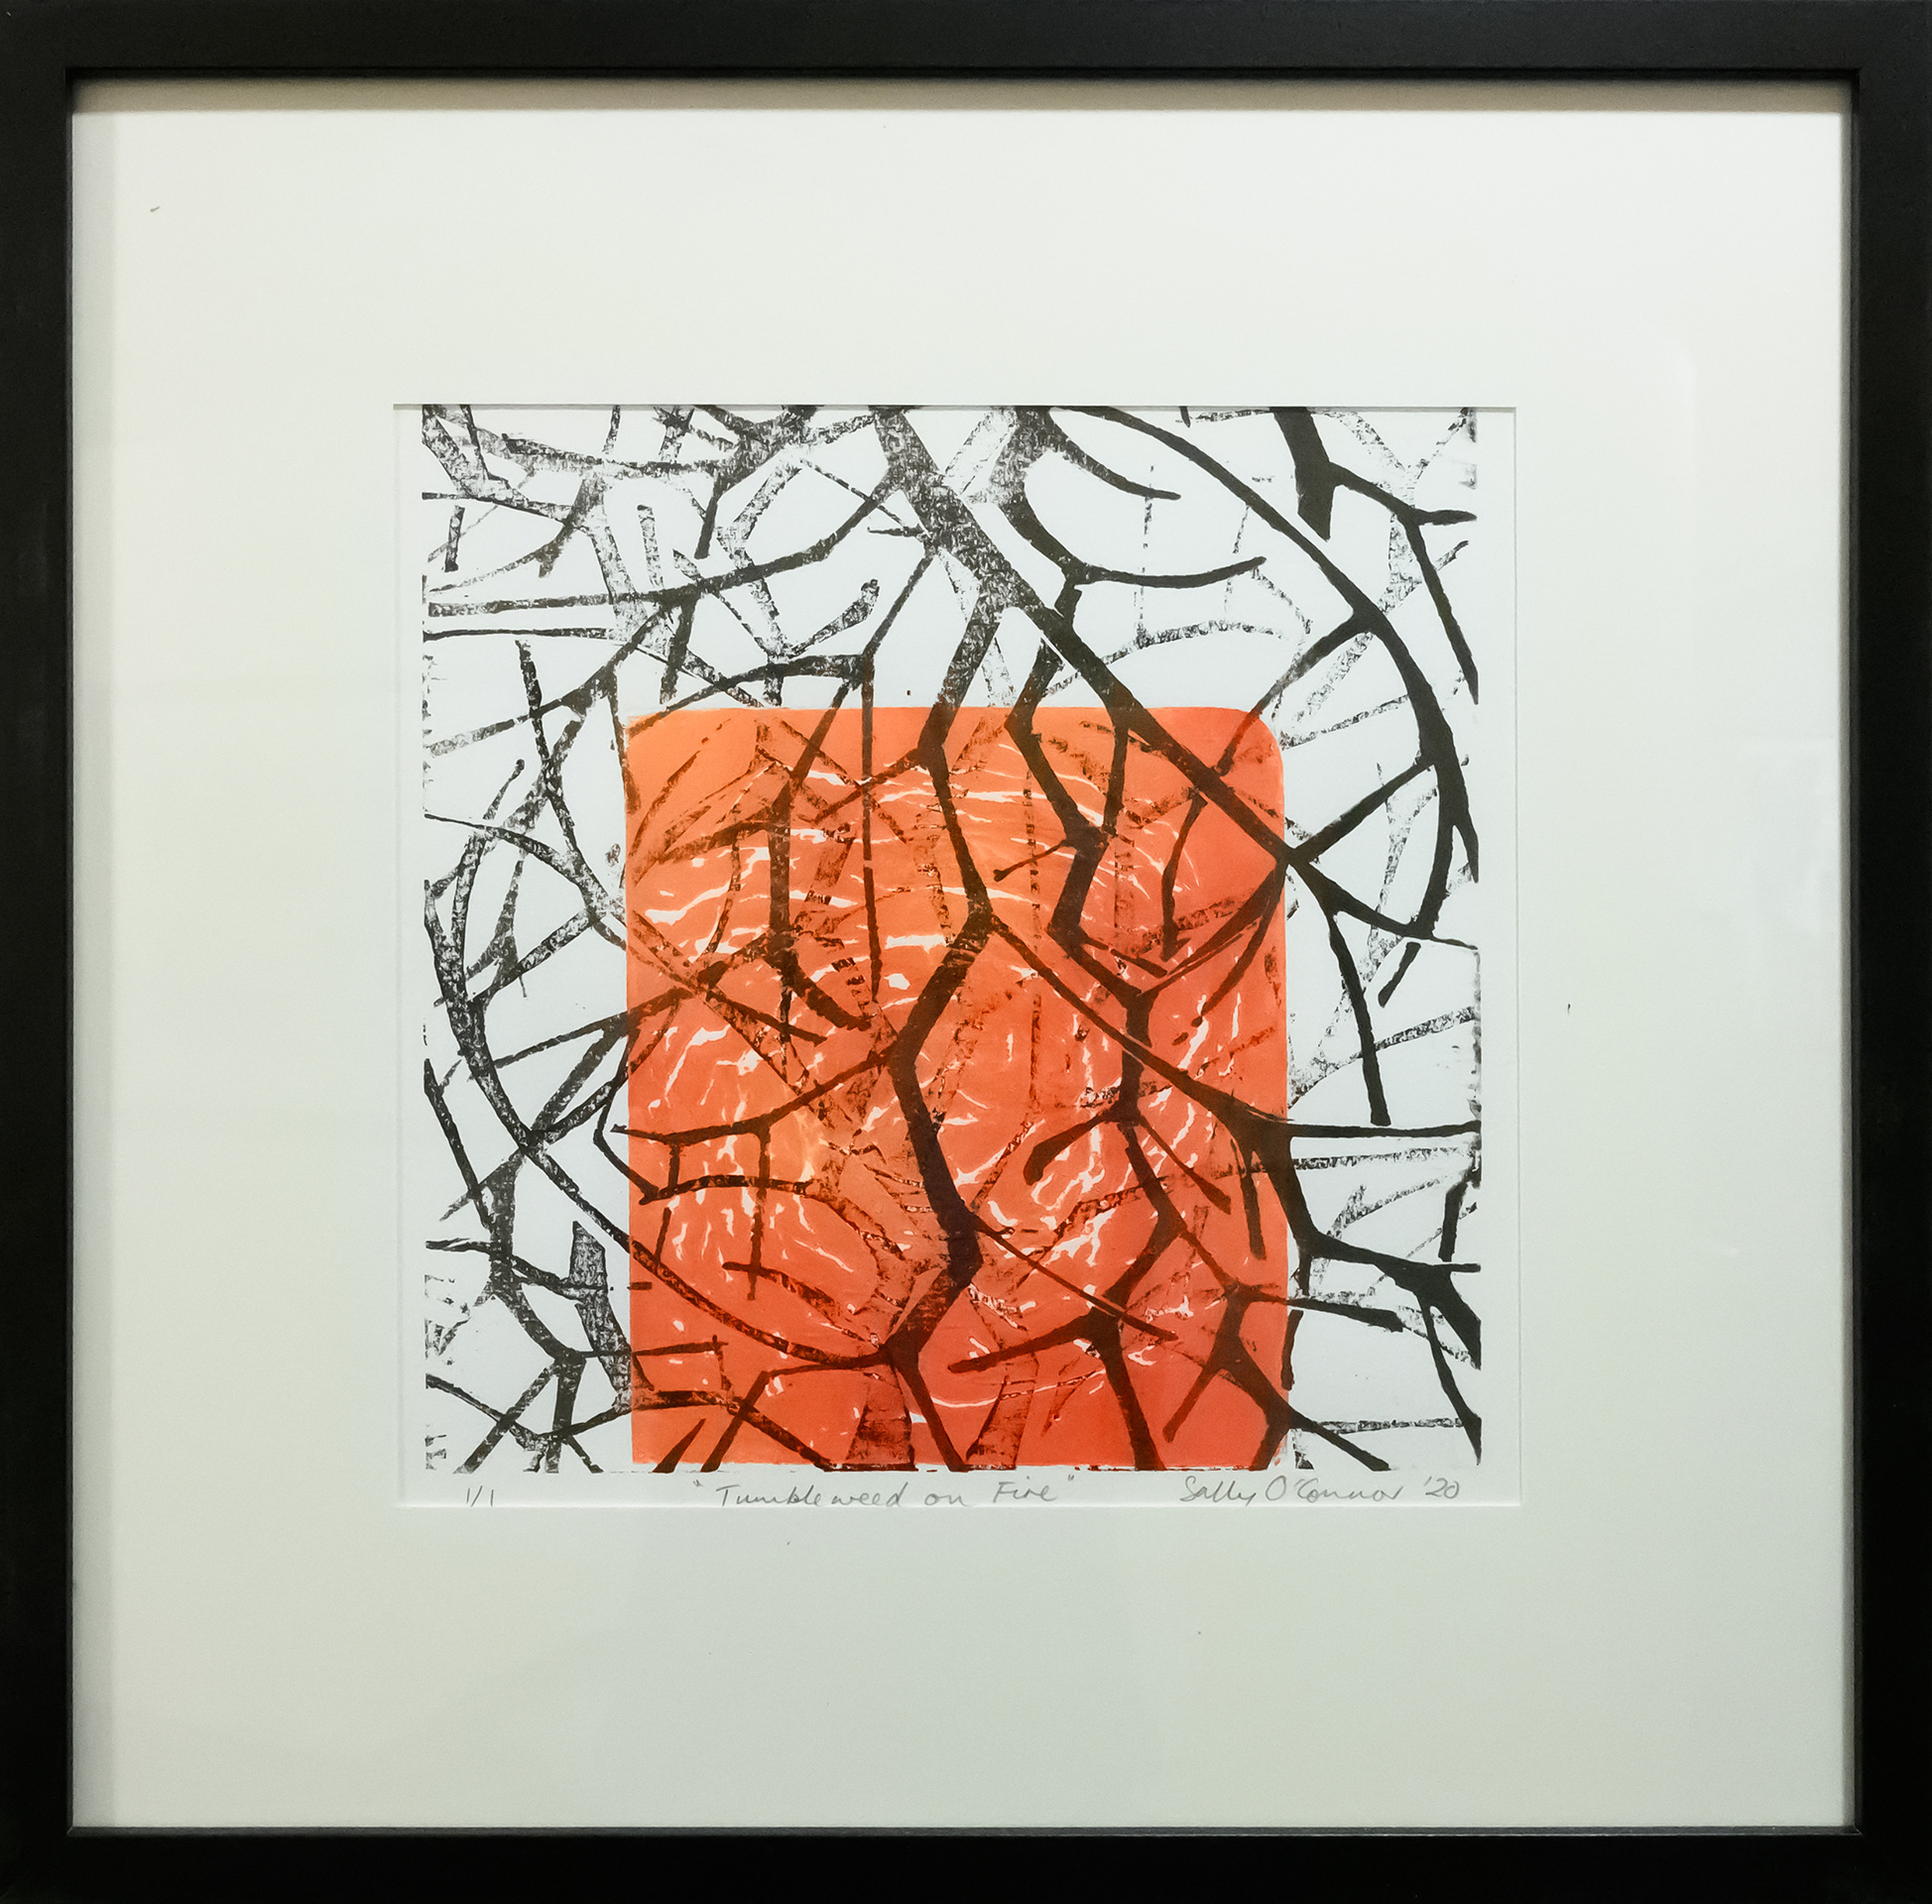 Framed artwork by Sally OConnor of layers of closeup black tumbleweed branches on a orange/red background